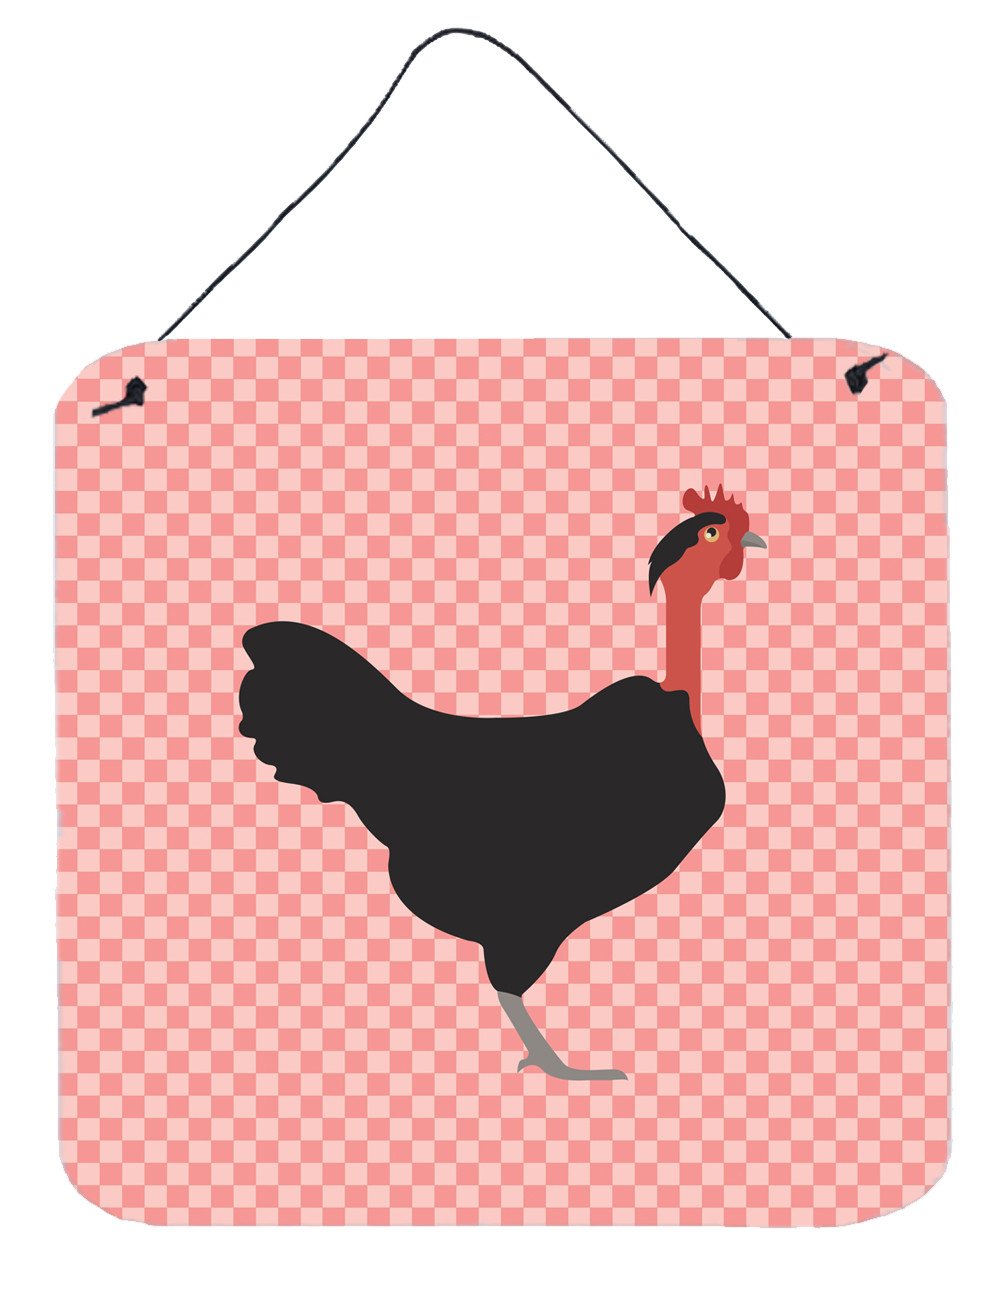 Naked Neck Chicken Pink Check Wall or Door Hanging Prints BB7839DS66 by Caroline's Treasures